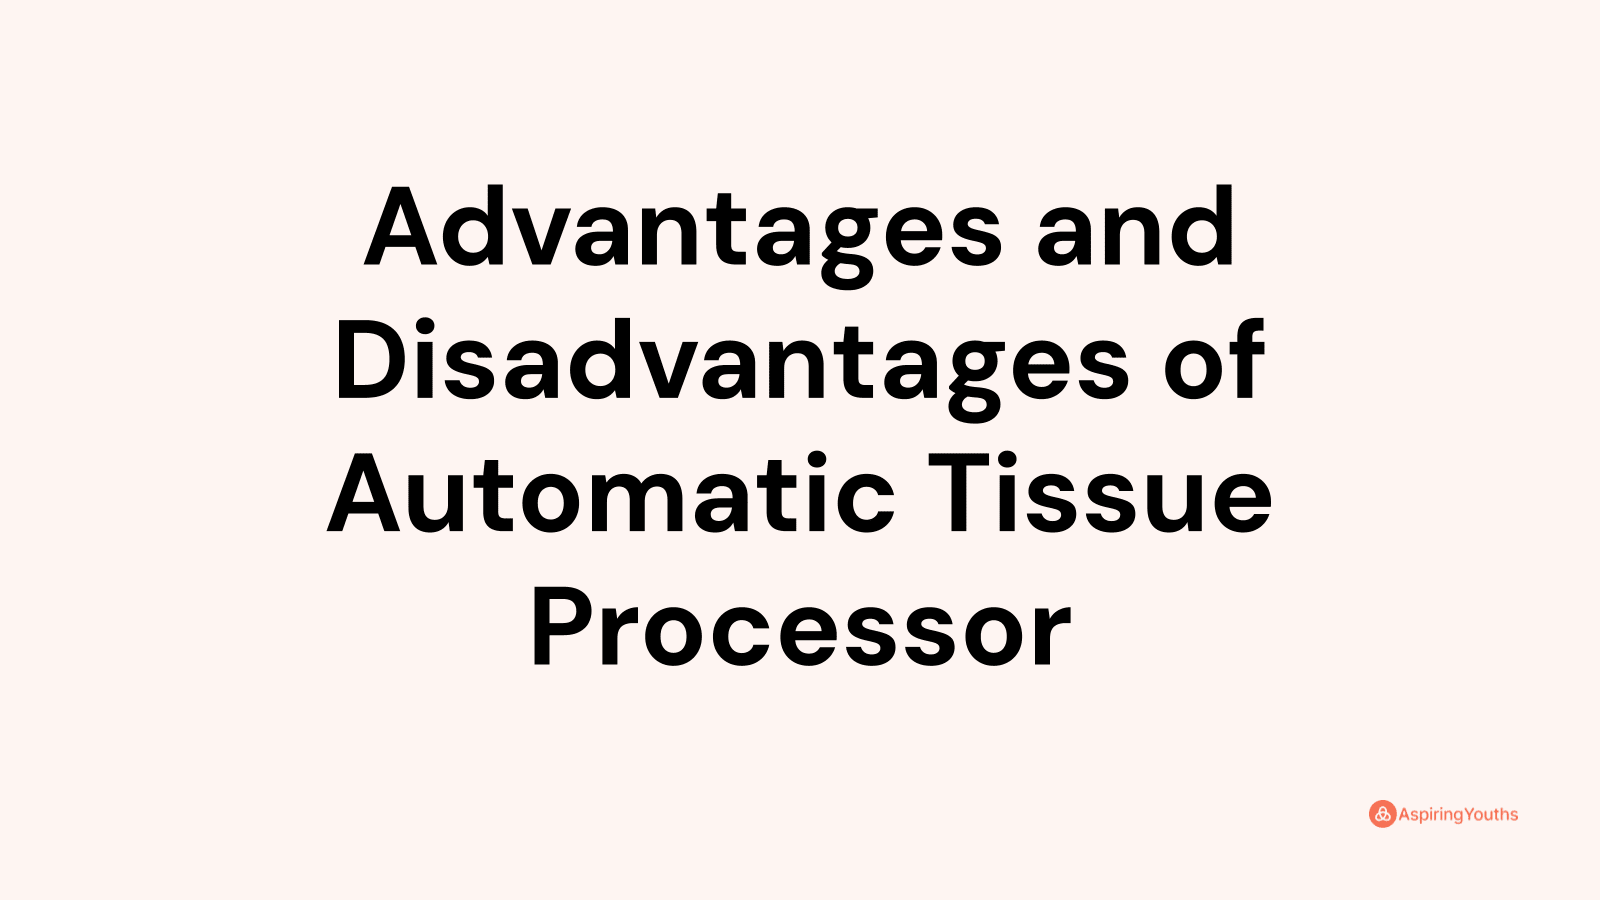 Advantages and disadvantages of Automatic Tissue Processor